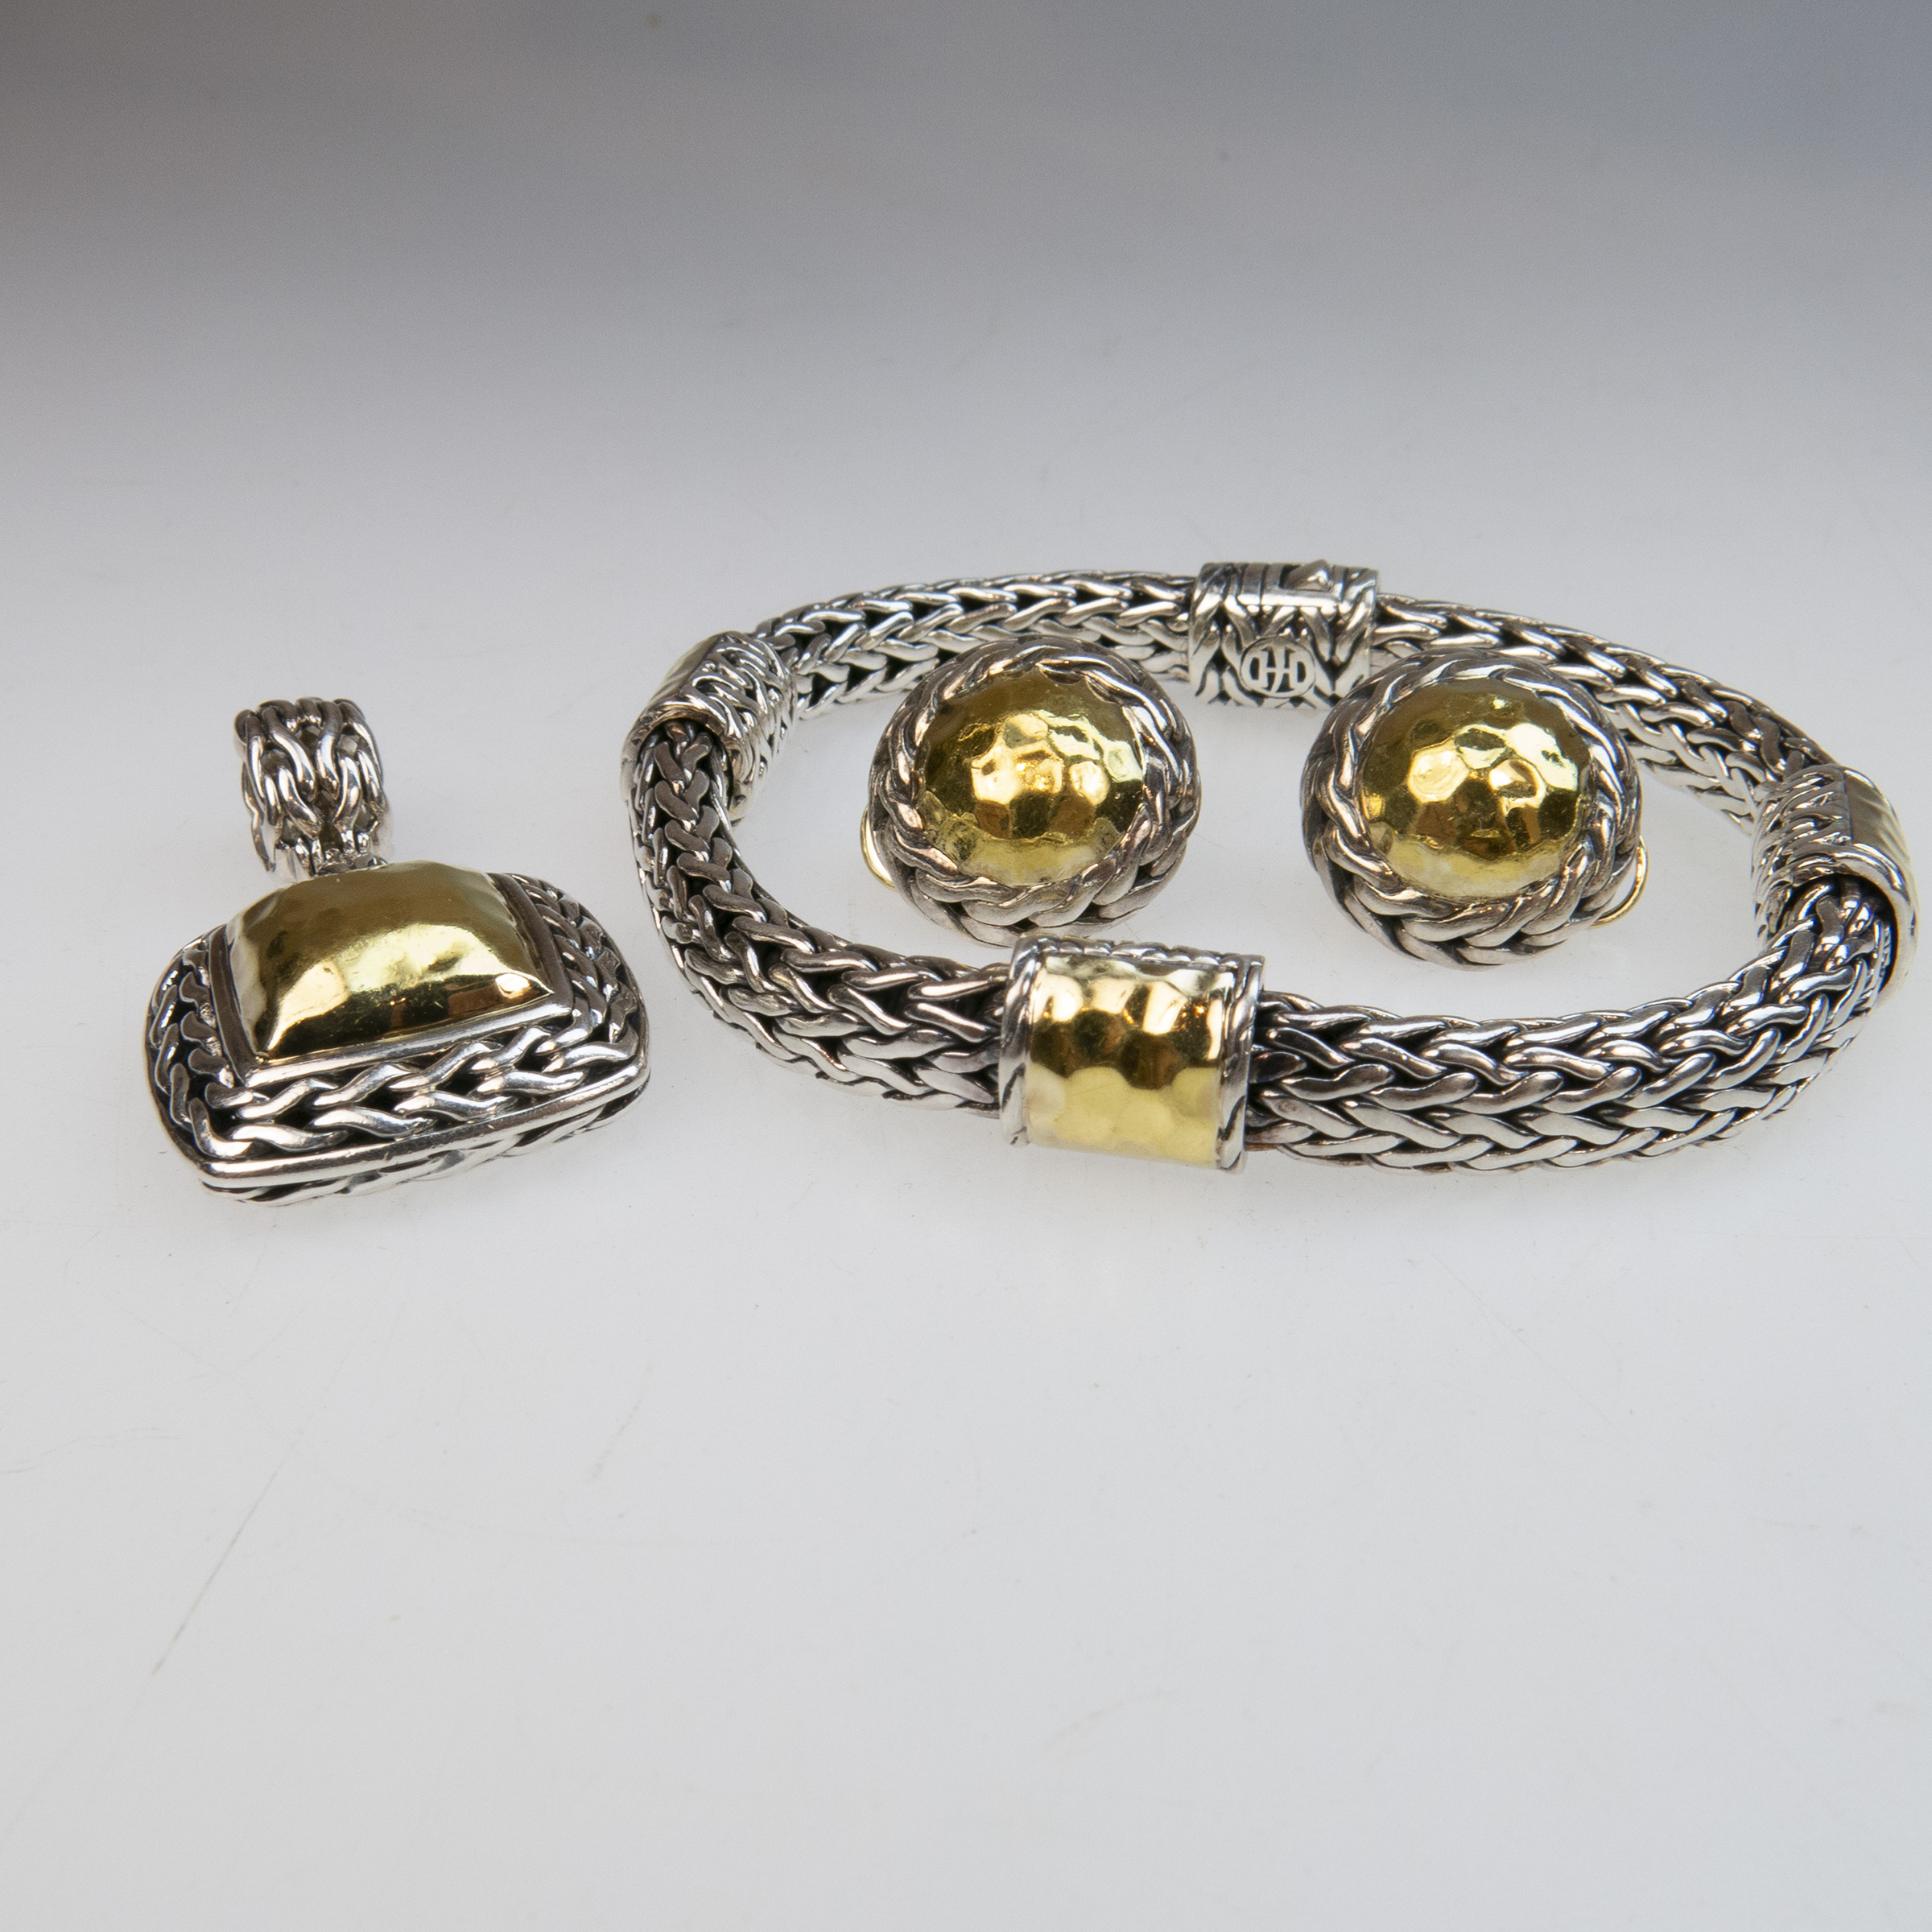 Four Piece John Hardy Sterling Silver And 22k Yellow Gold Jewellery Suite